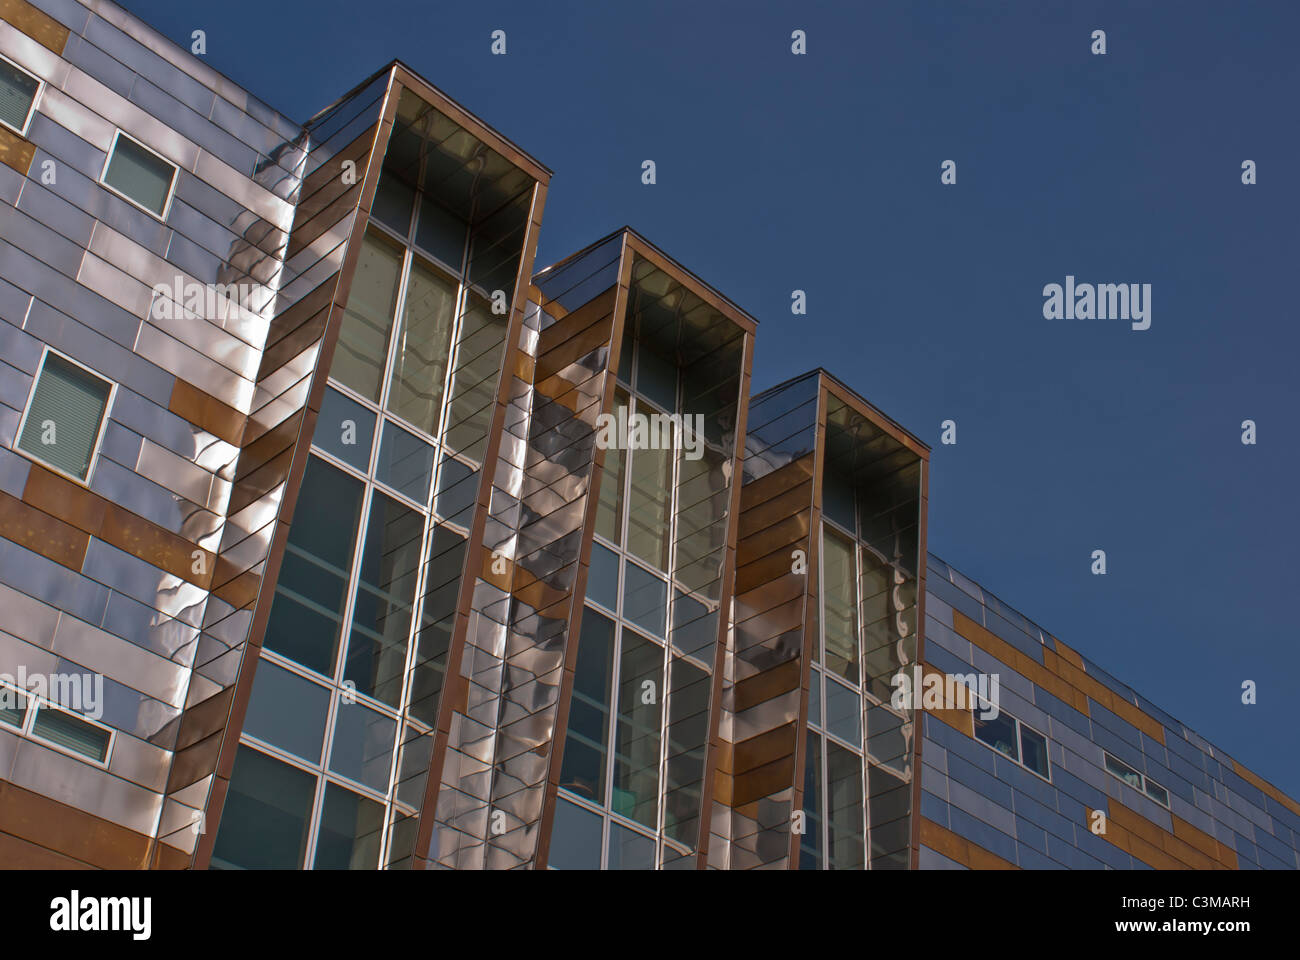 Metal Cladding Detail High Resolution Stock Photography and Images - Alamy